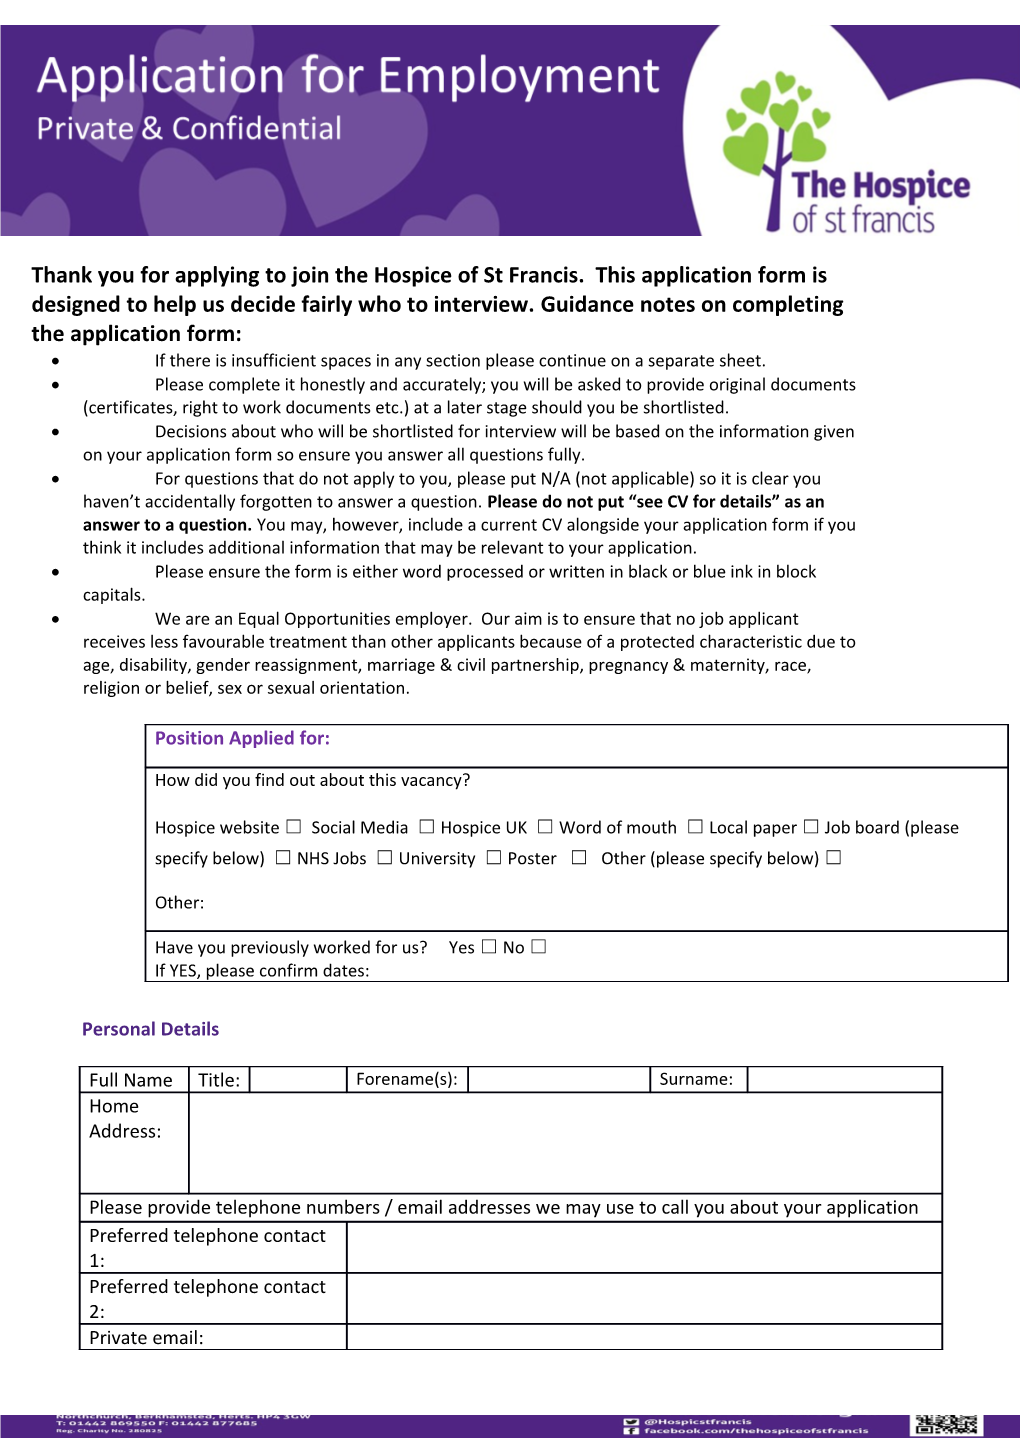 Thank You for Applying to Join the Hospice of St Francis. This Application Form Is Designed